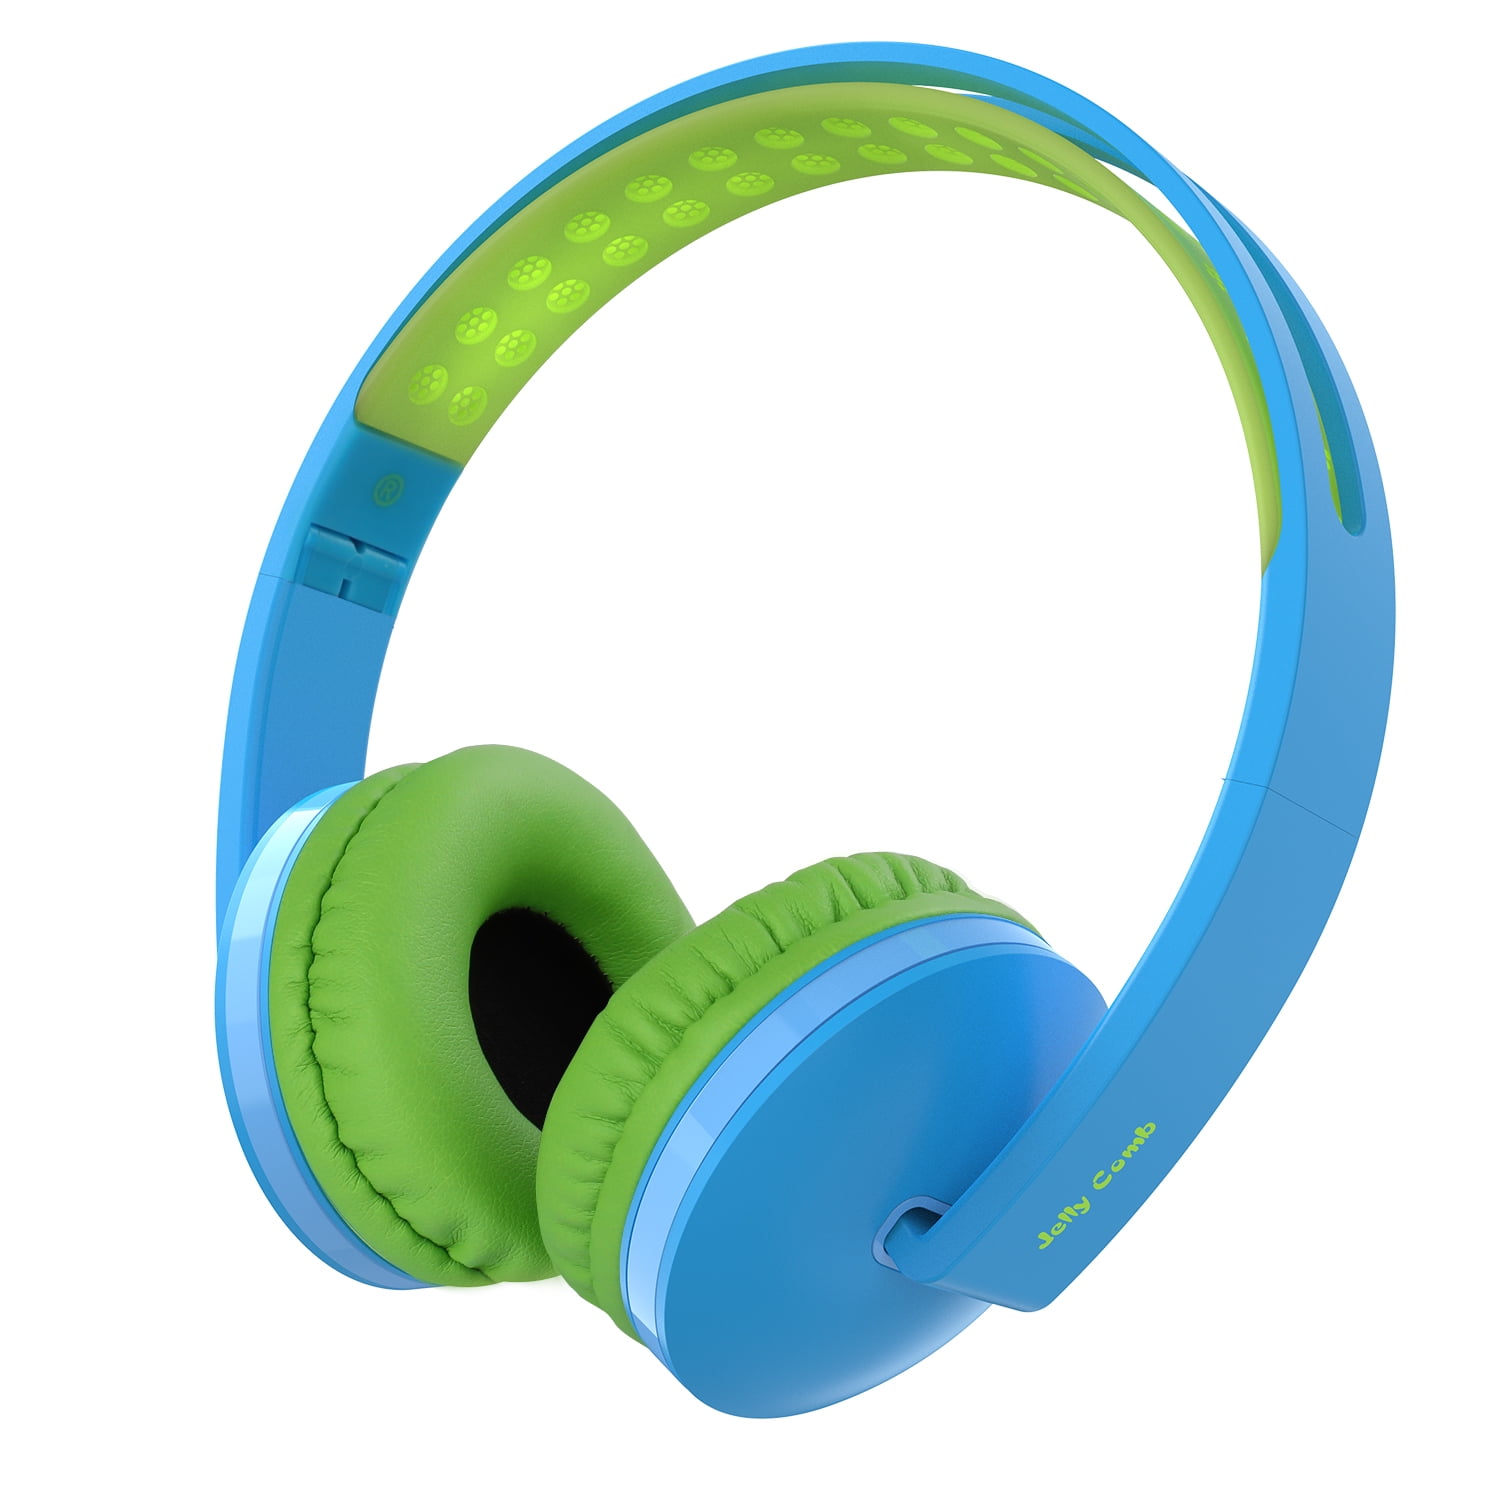 On Ear Headphones with Mic, Jelly Comb Foldable Corded Headphones Wired Headsets with Microphone, Volume Control for Cell Phone, Tablet, PC, Laptop, MP3/4, Video Game (Sky Blue &amp; Grass Green)